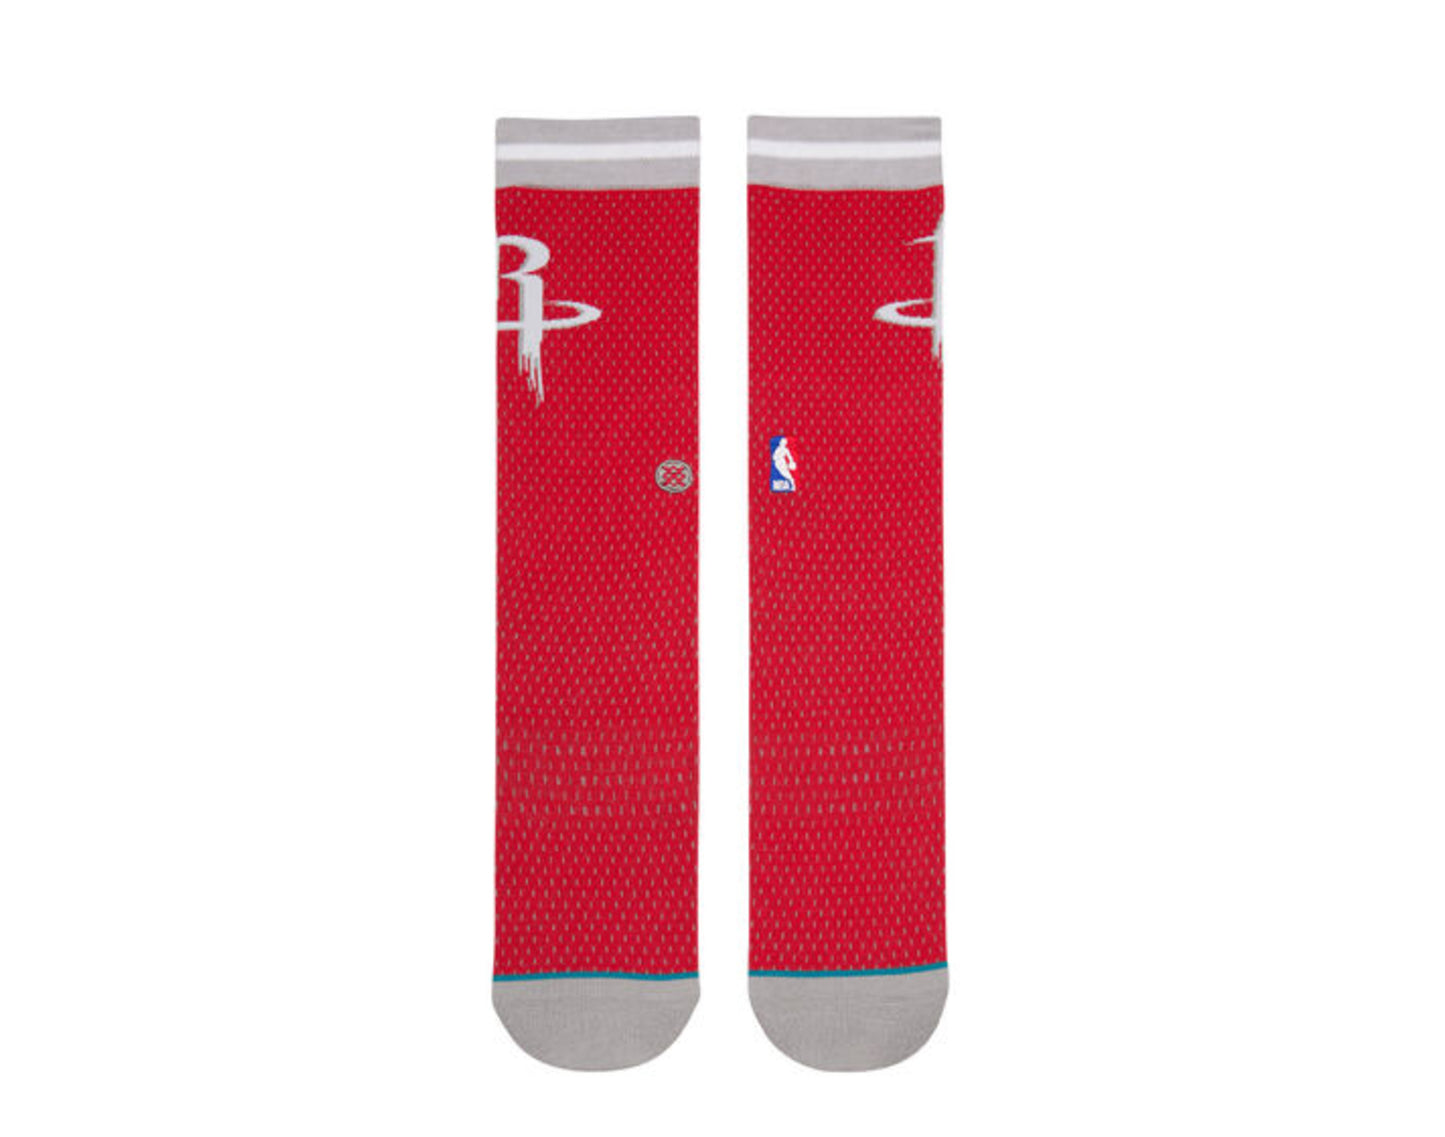 Stance Casual NBA Houston Rockets Jersey Red/Grey Crew Socks M545D17ROC-RED